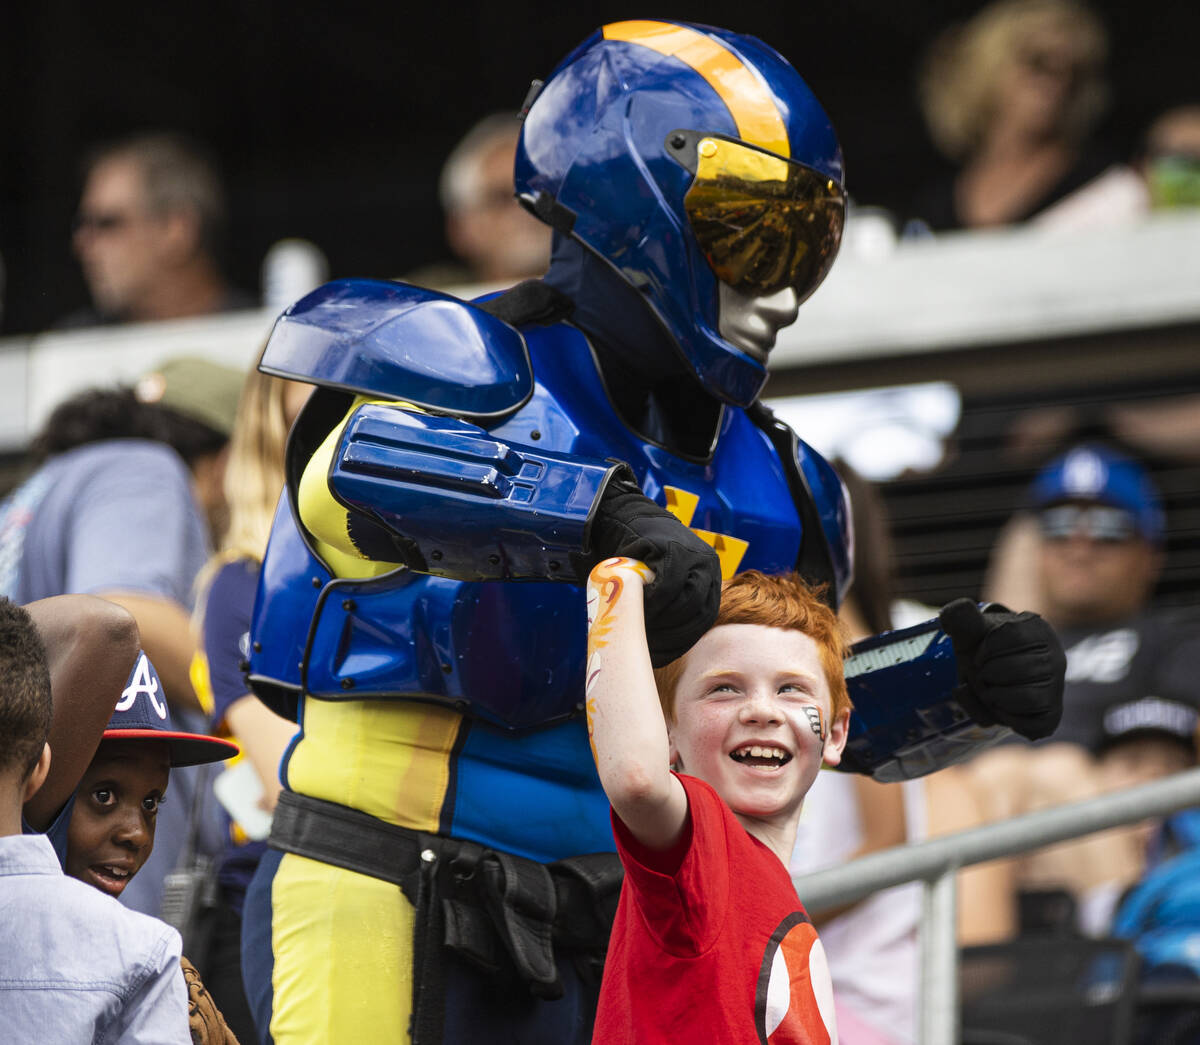 Colton Bunnell, 8, flexes with the help of Las Vegas mascot Aviator during a minor league baseb ...